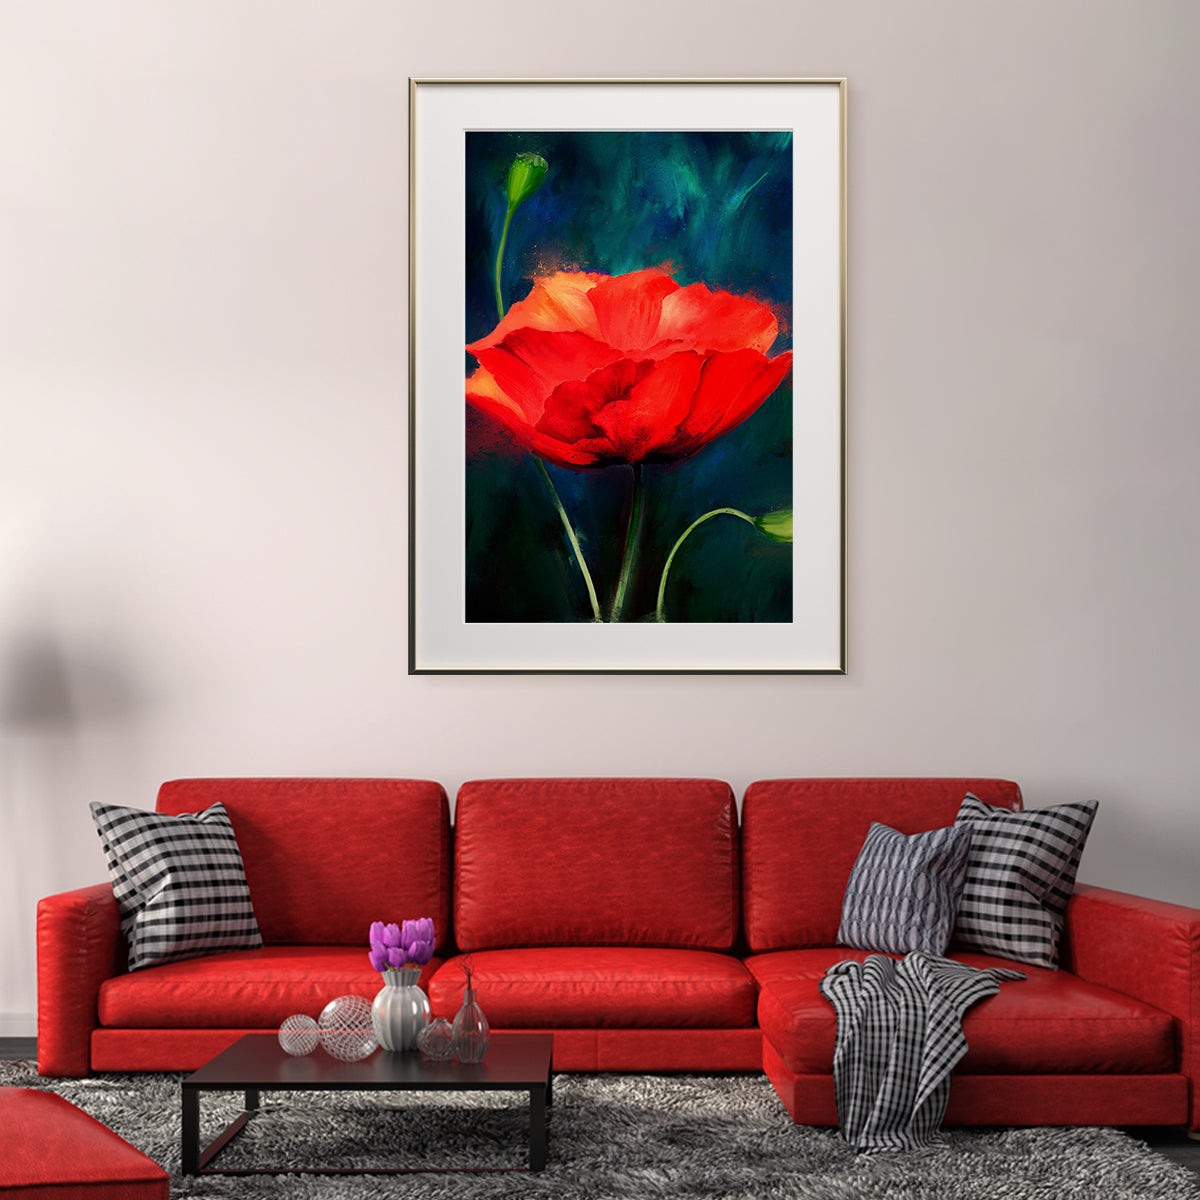 Abstract Poppy Contemporary Art Prints Posters-Vertical Posters NOT FRAMED-CetArt-8″x10″ inches-CetArt